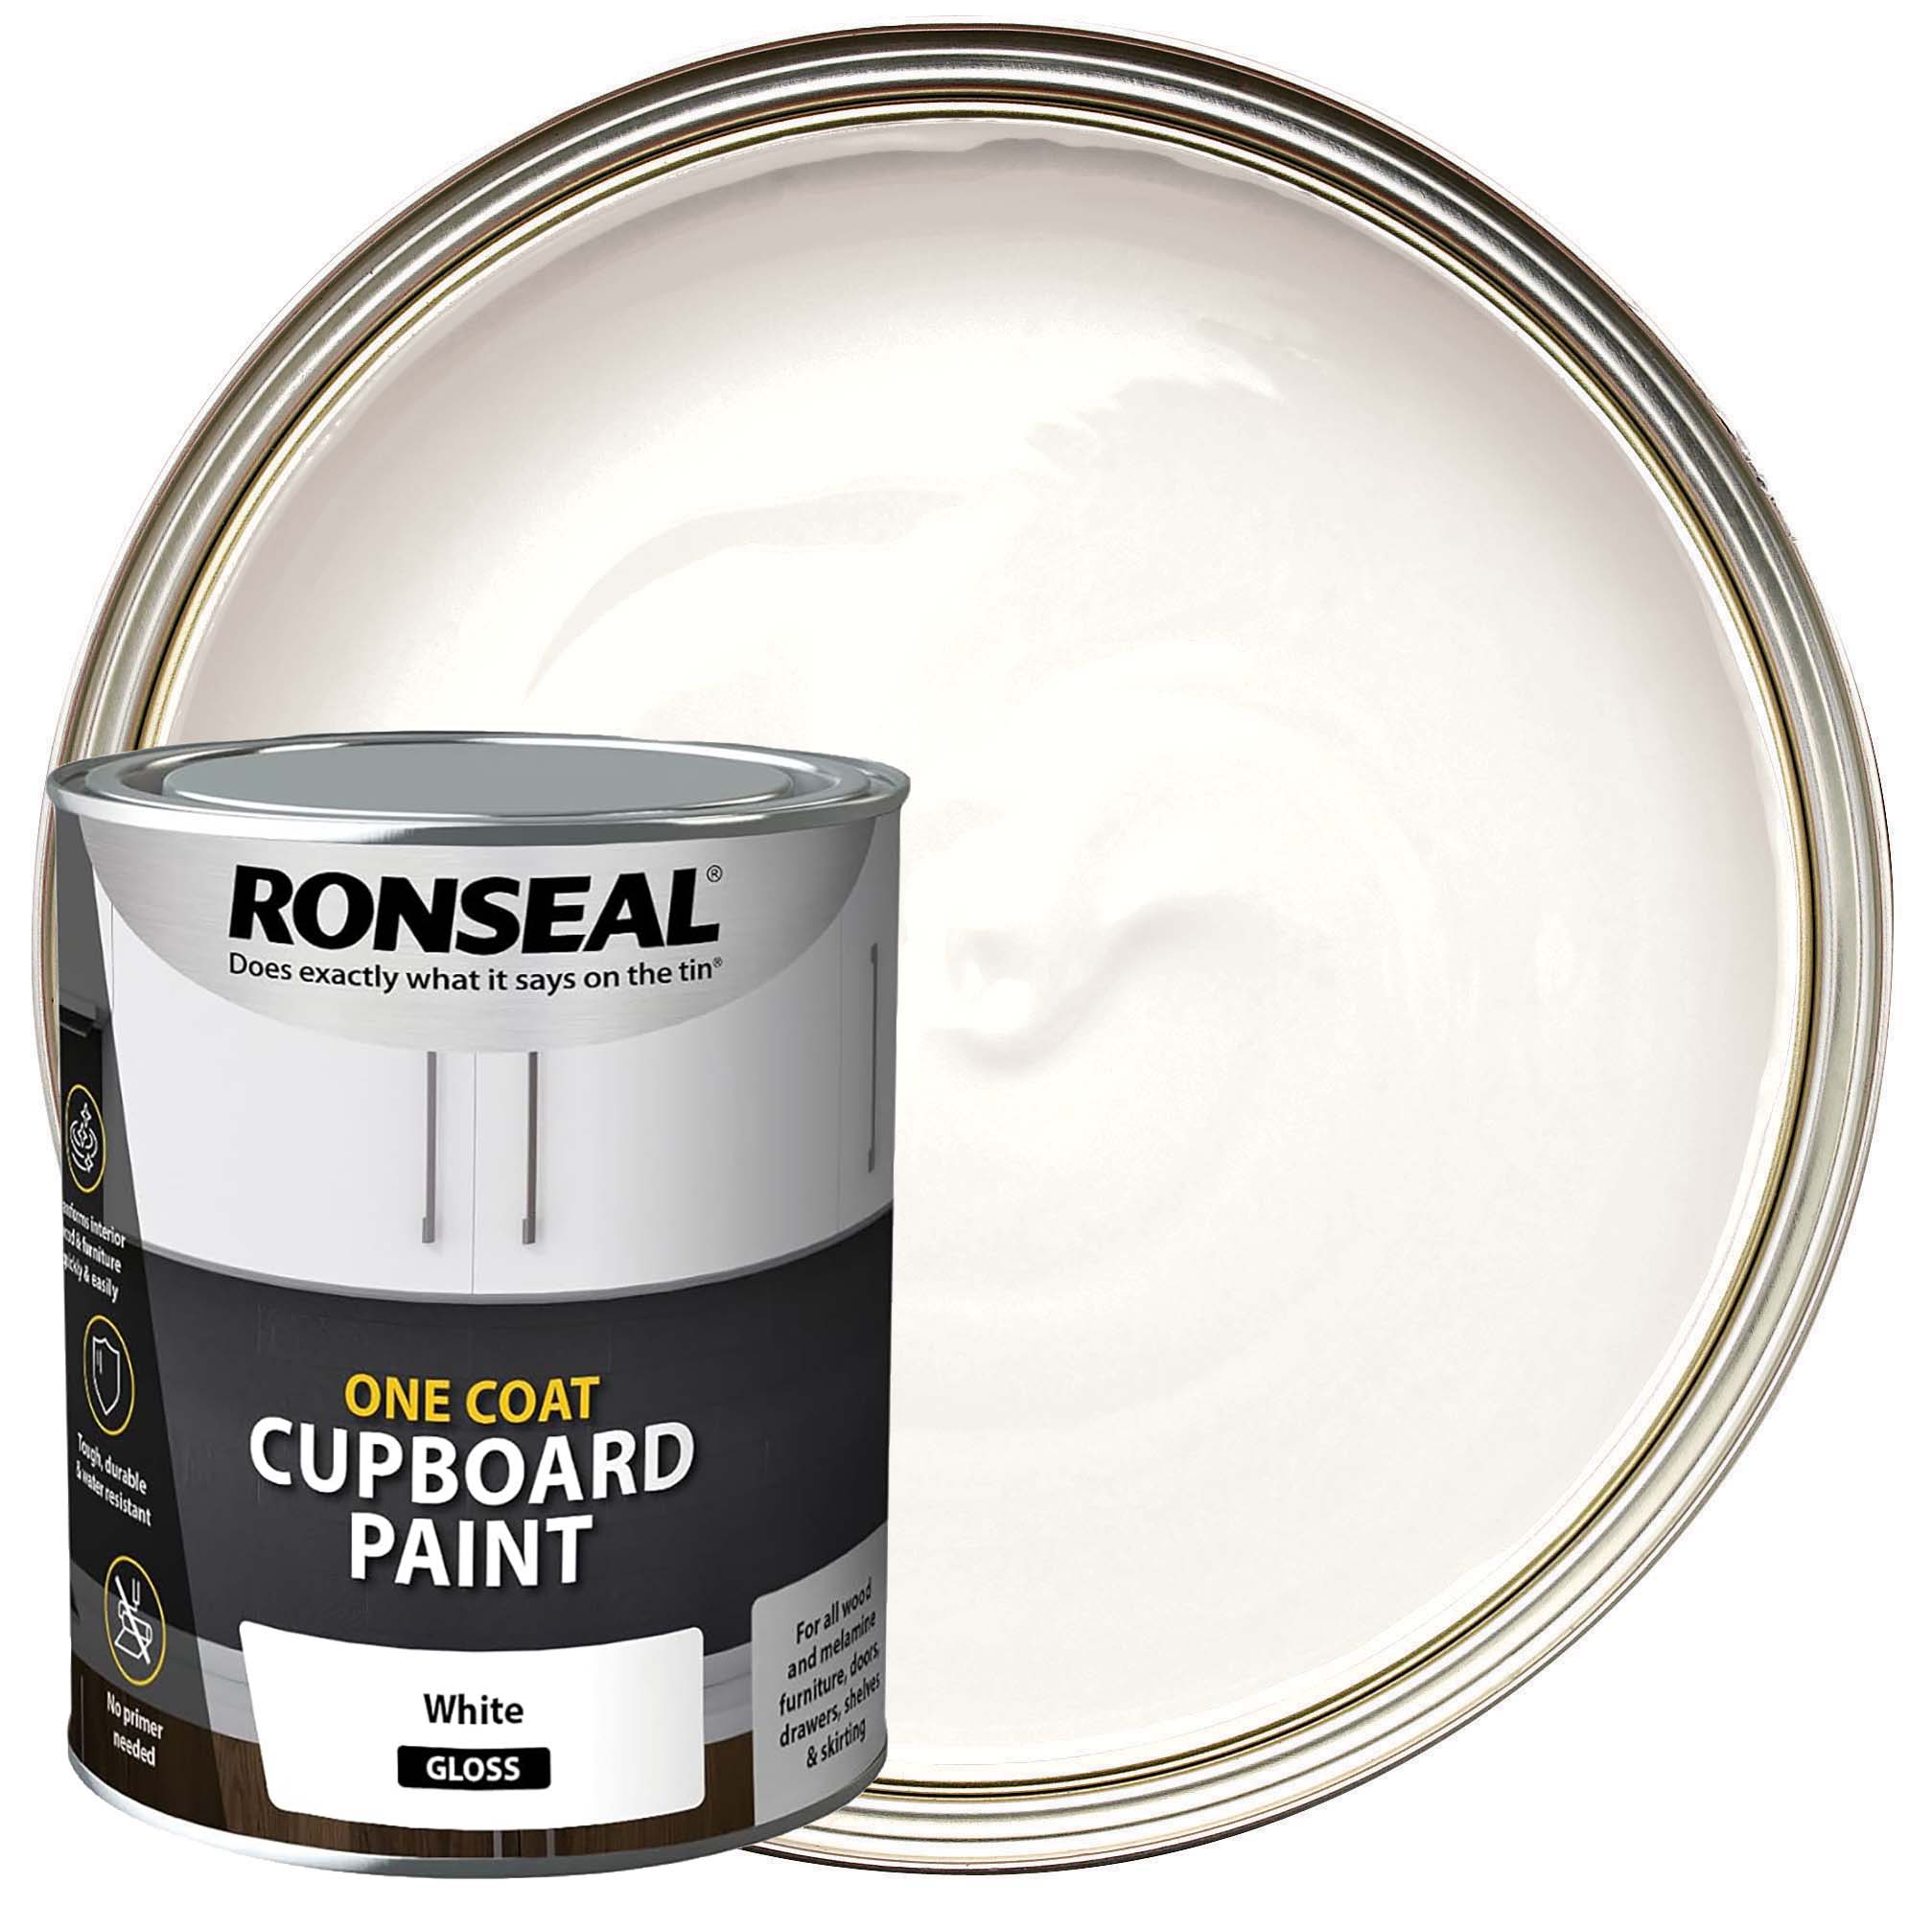 Ronseal One Coat Cupboard & Furniture Paint - White Gloss 750ml